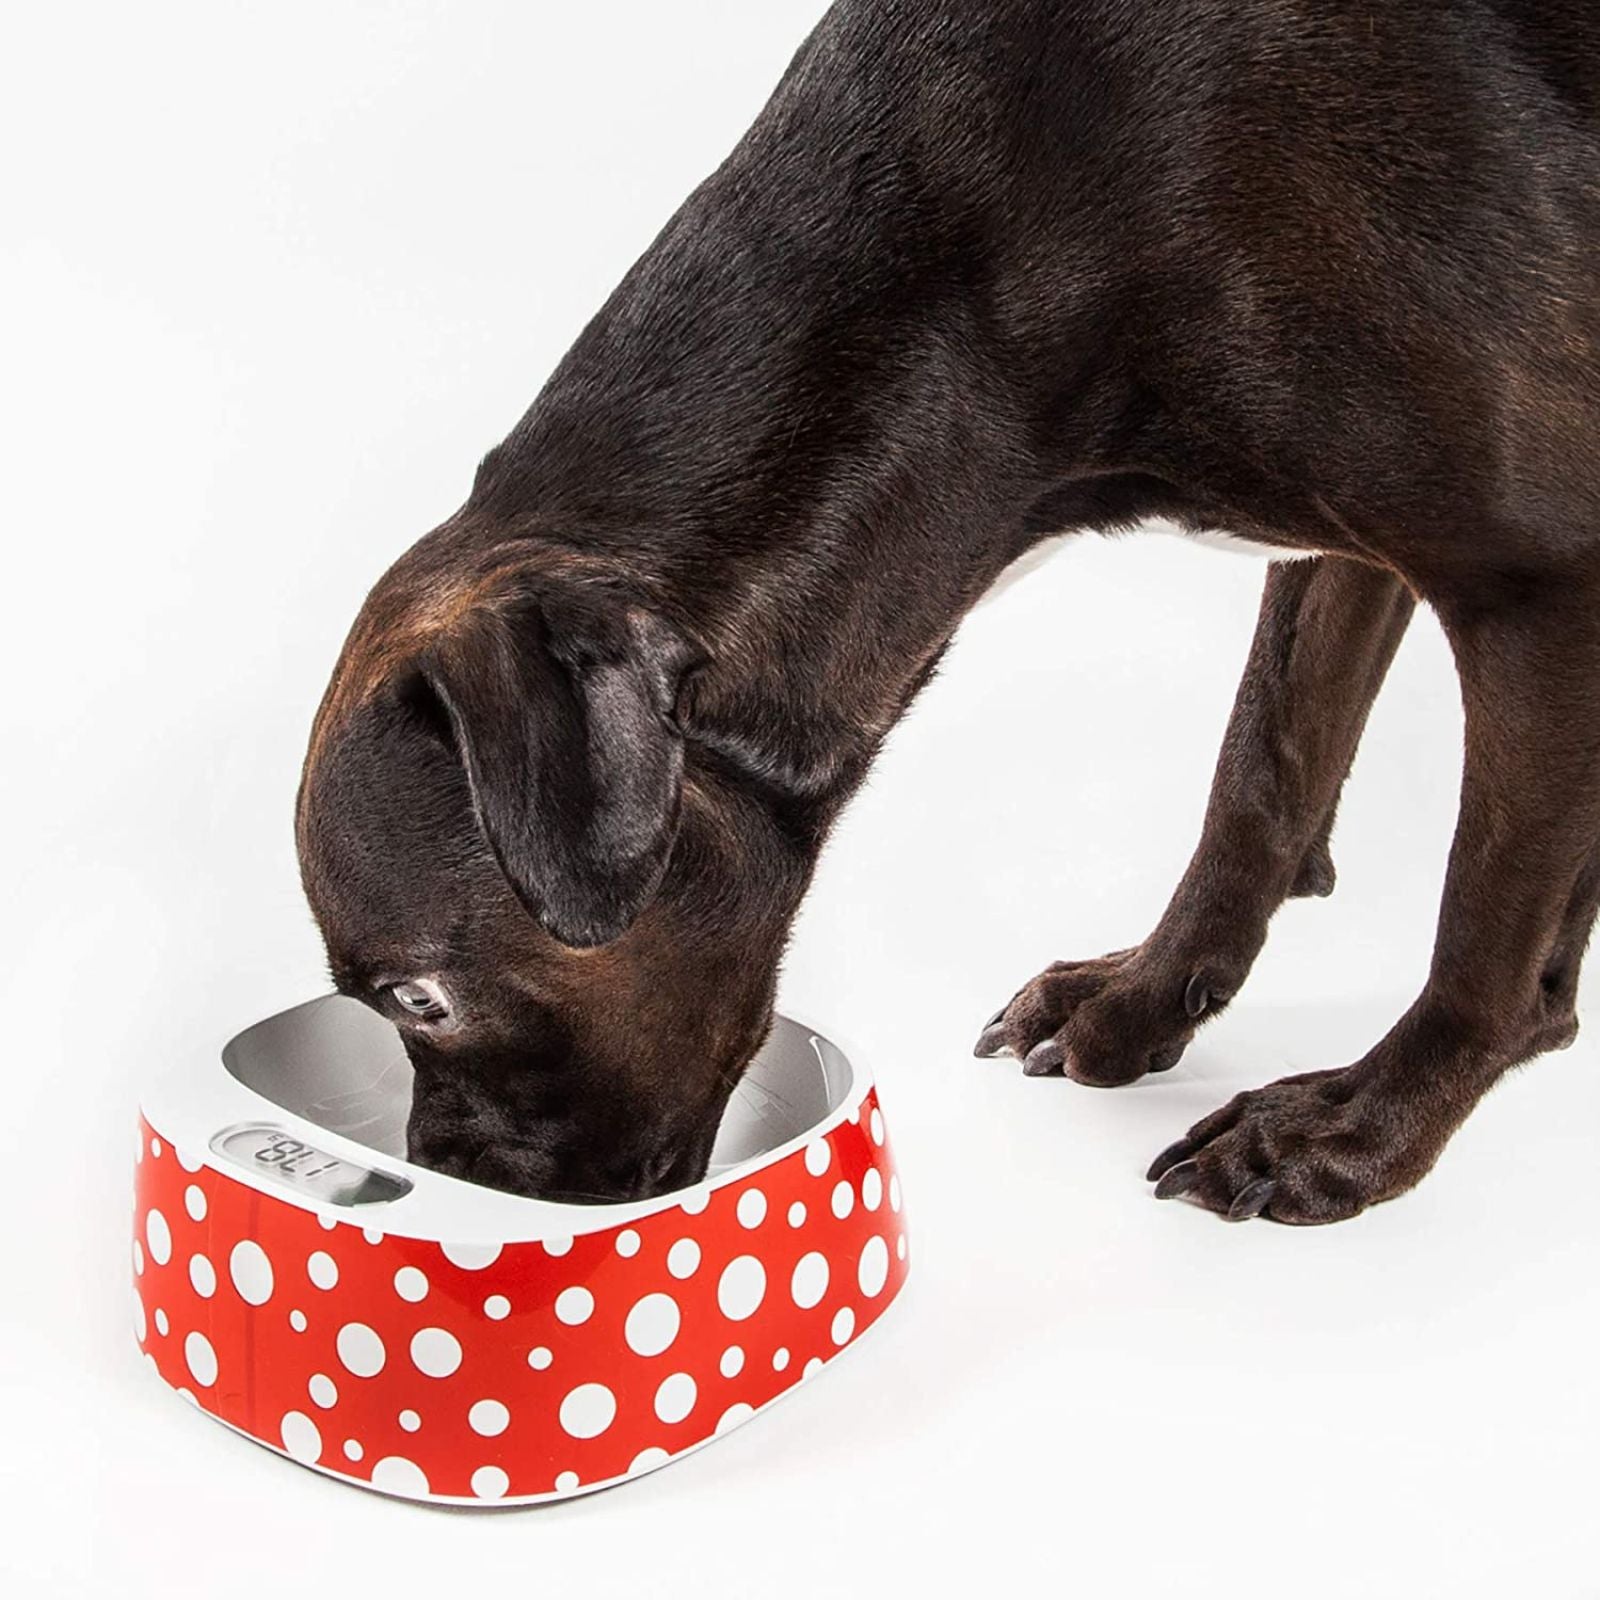 PETKIT Fresh Smart Antibacterial Pet Bowl, featuring a digital scale and a dog eating.